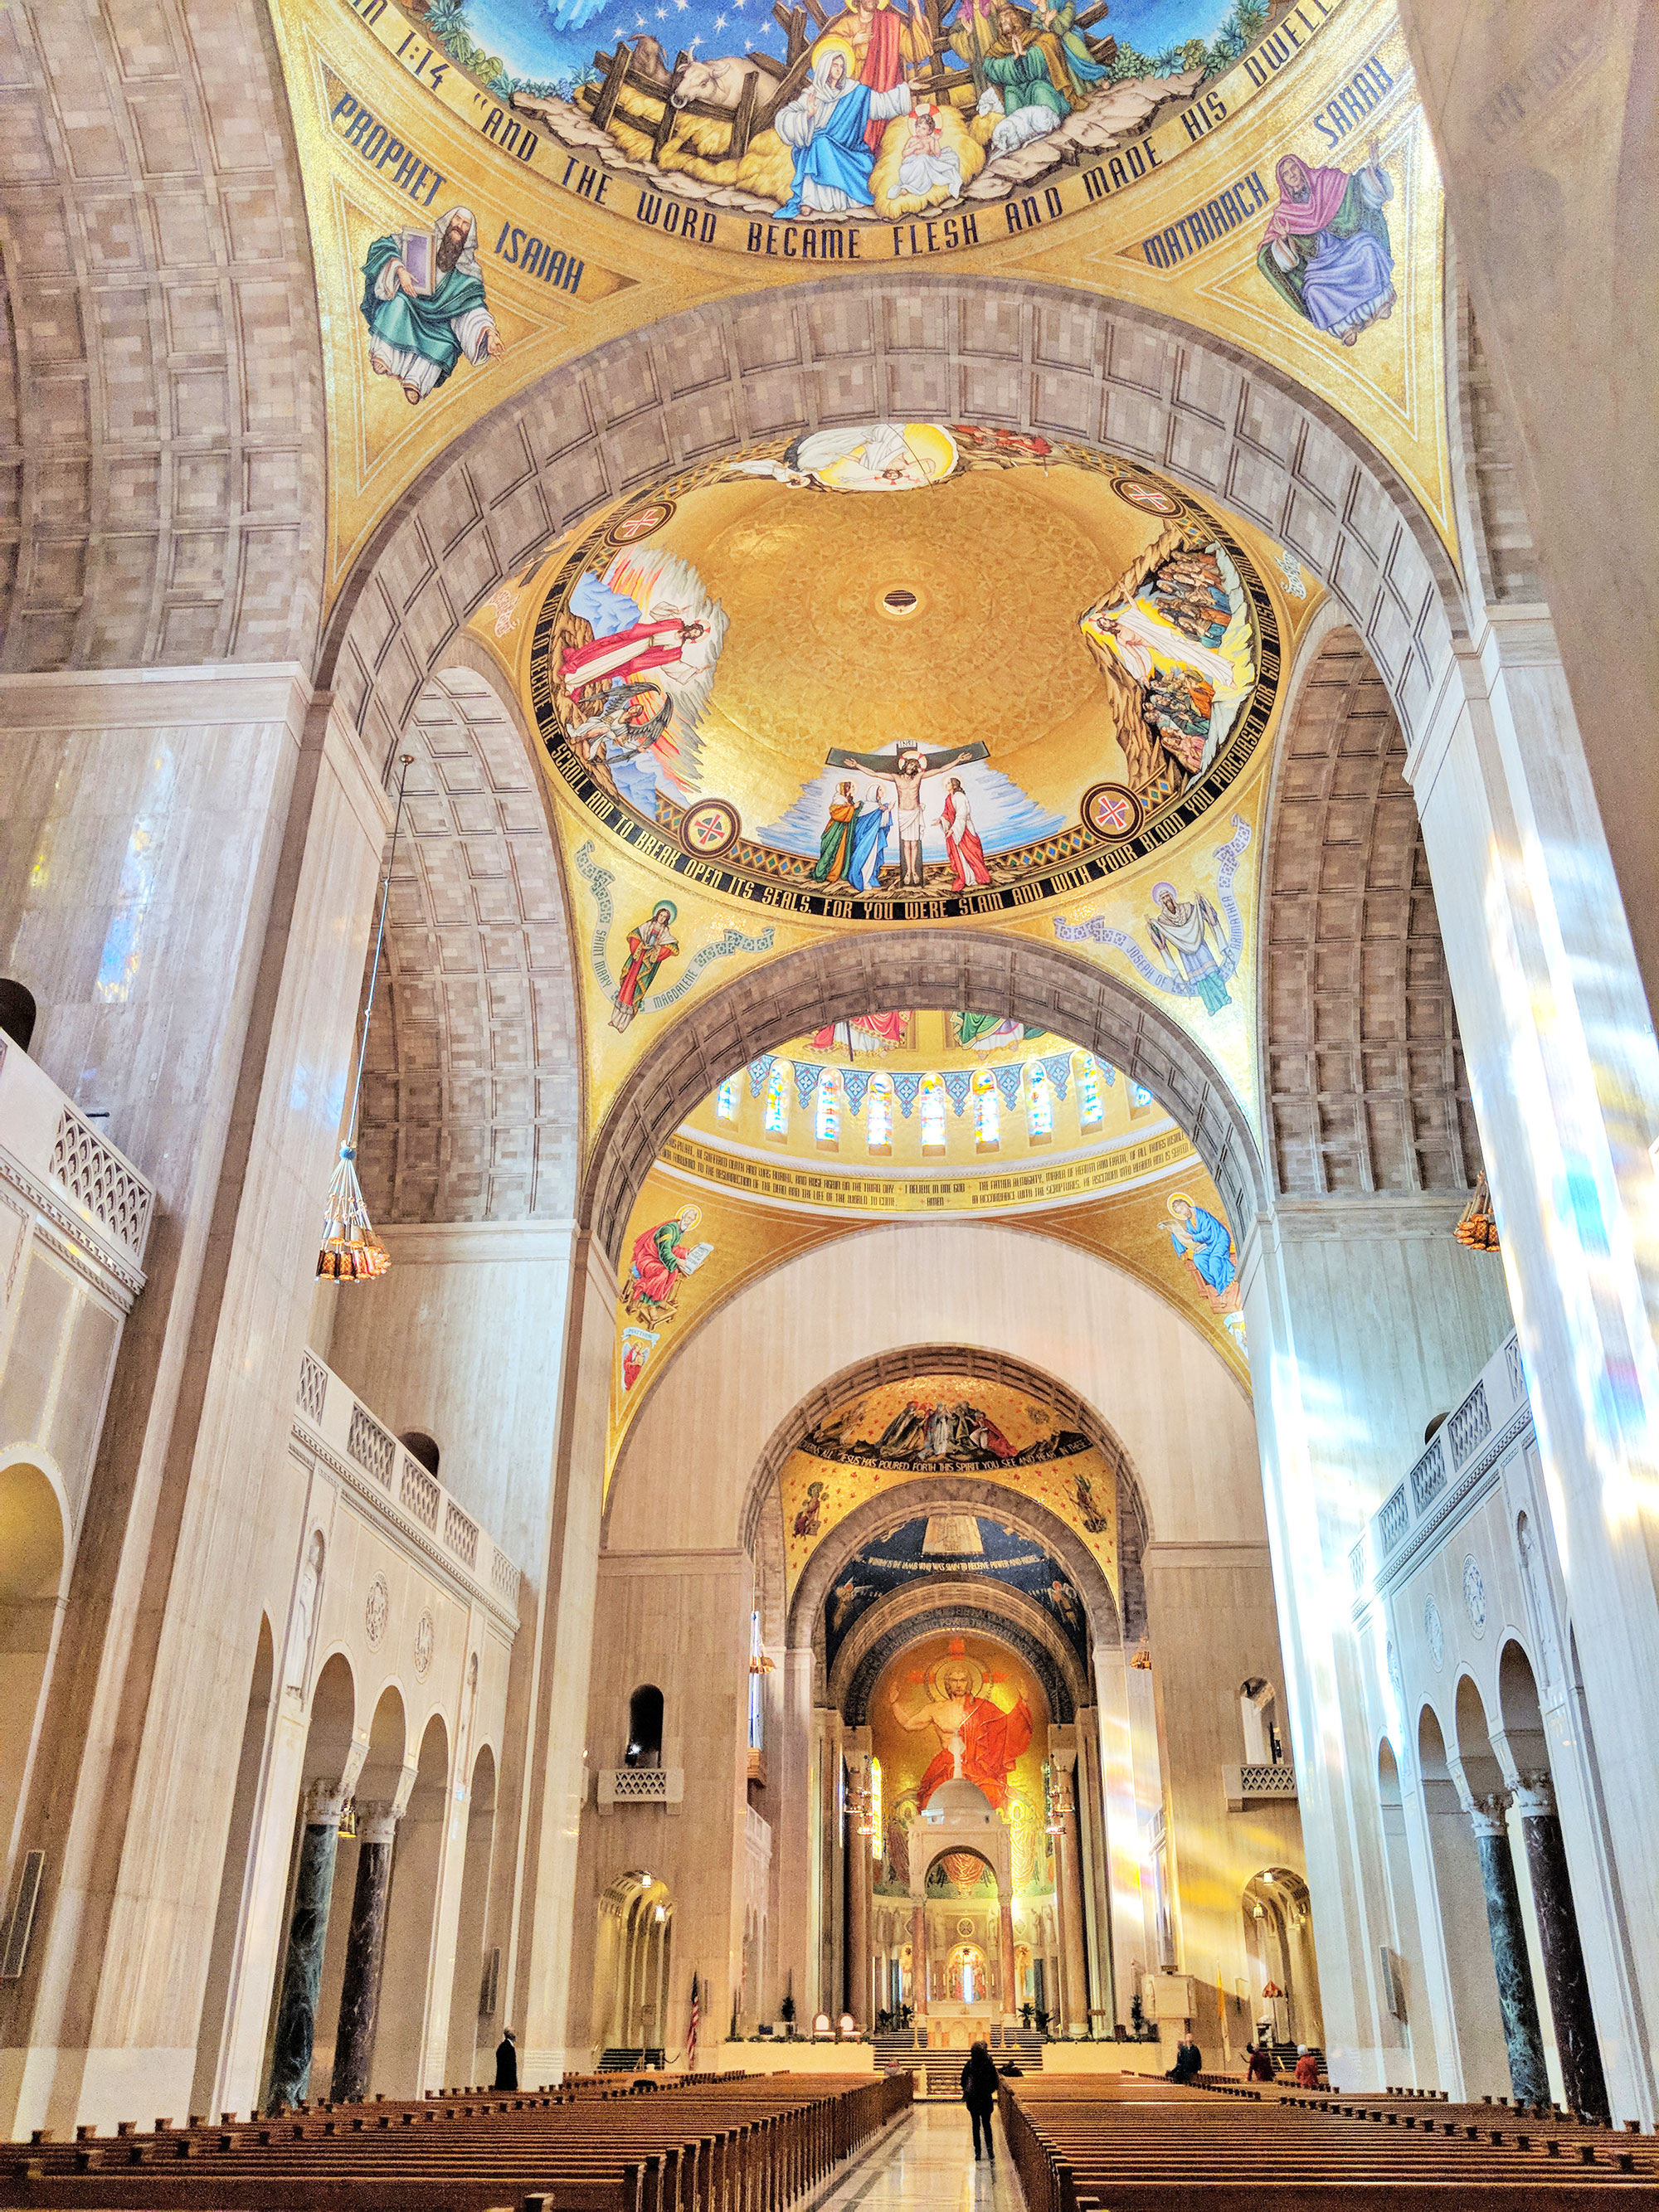 The upper church of the National Shrine of the Immaculate Conception in Washington D.C.